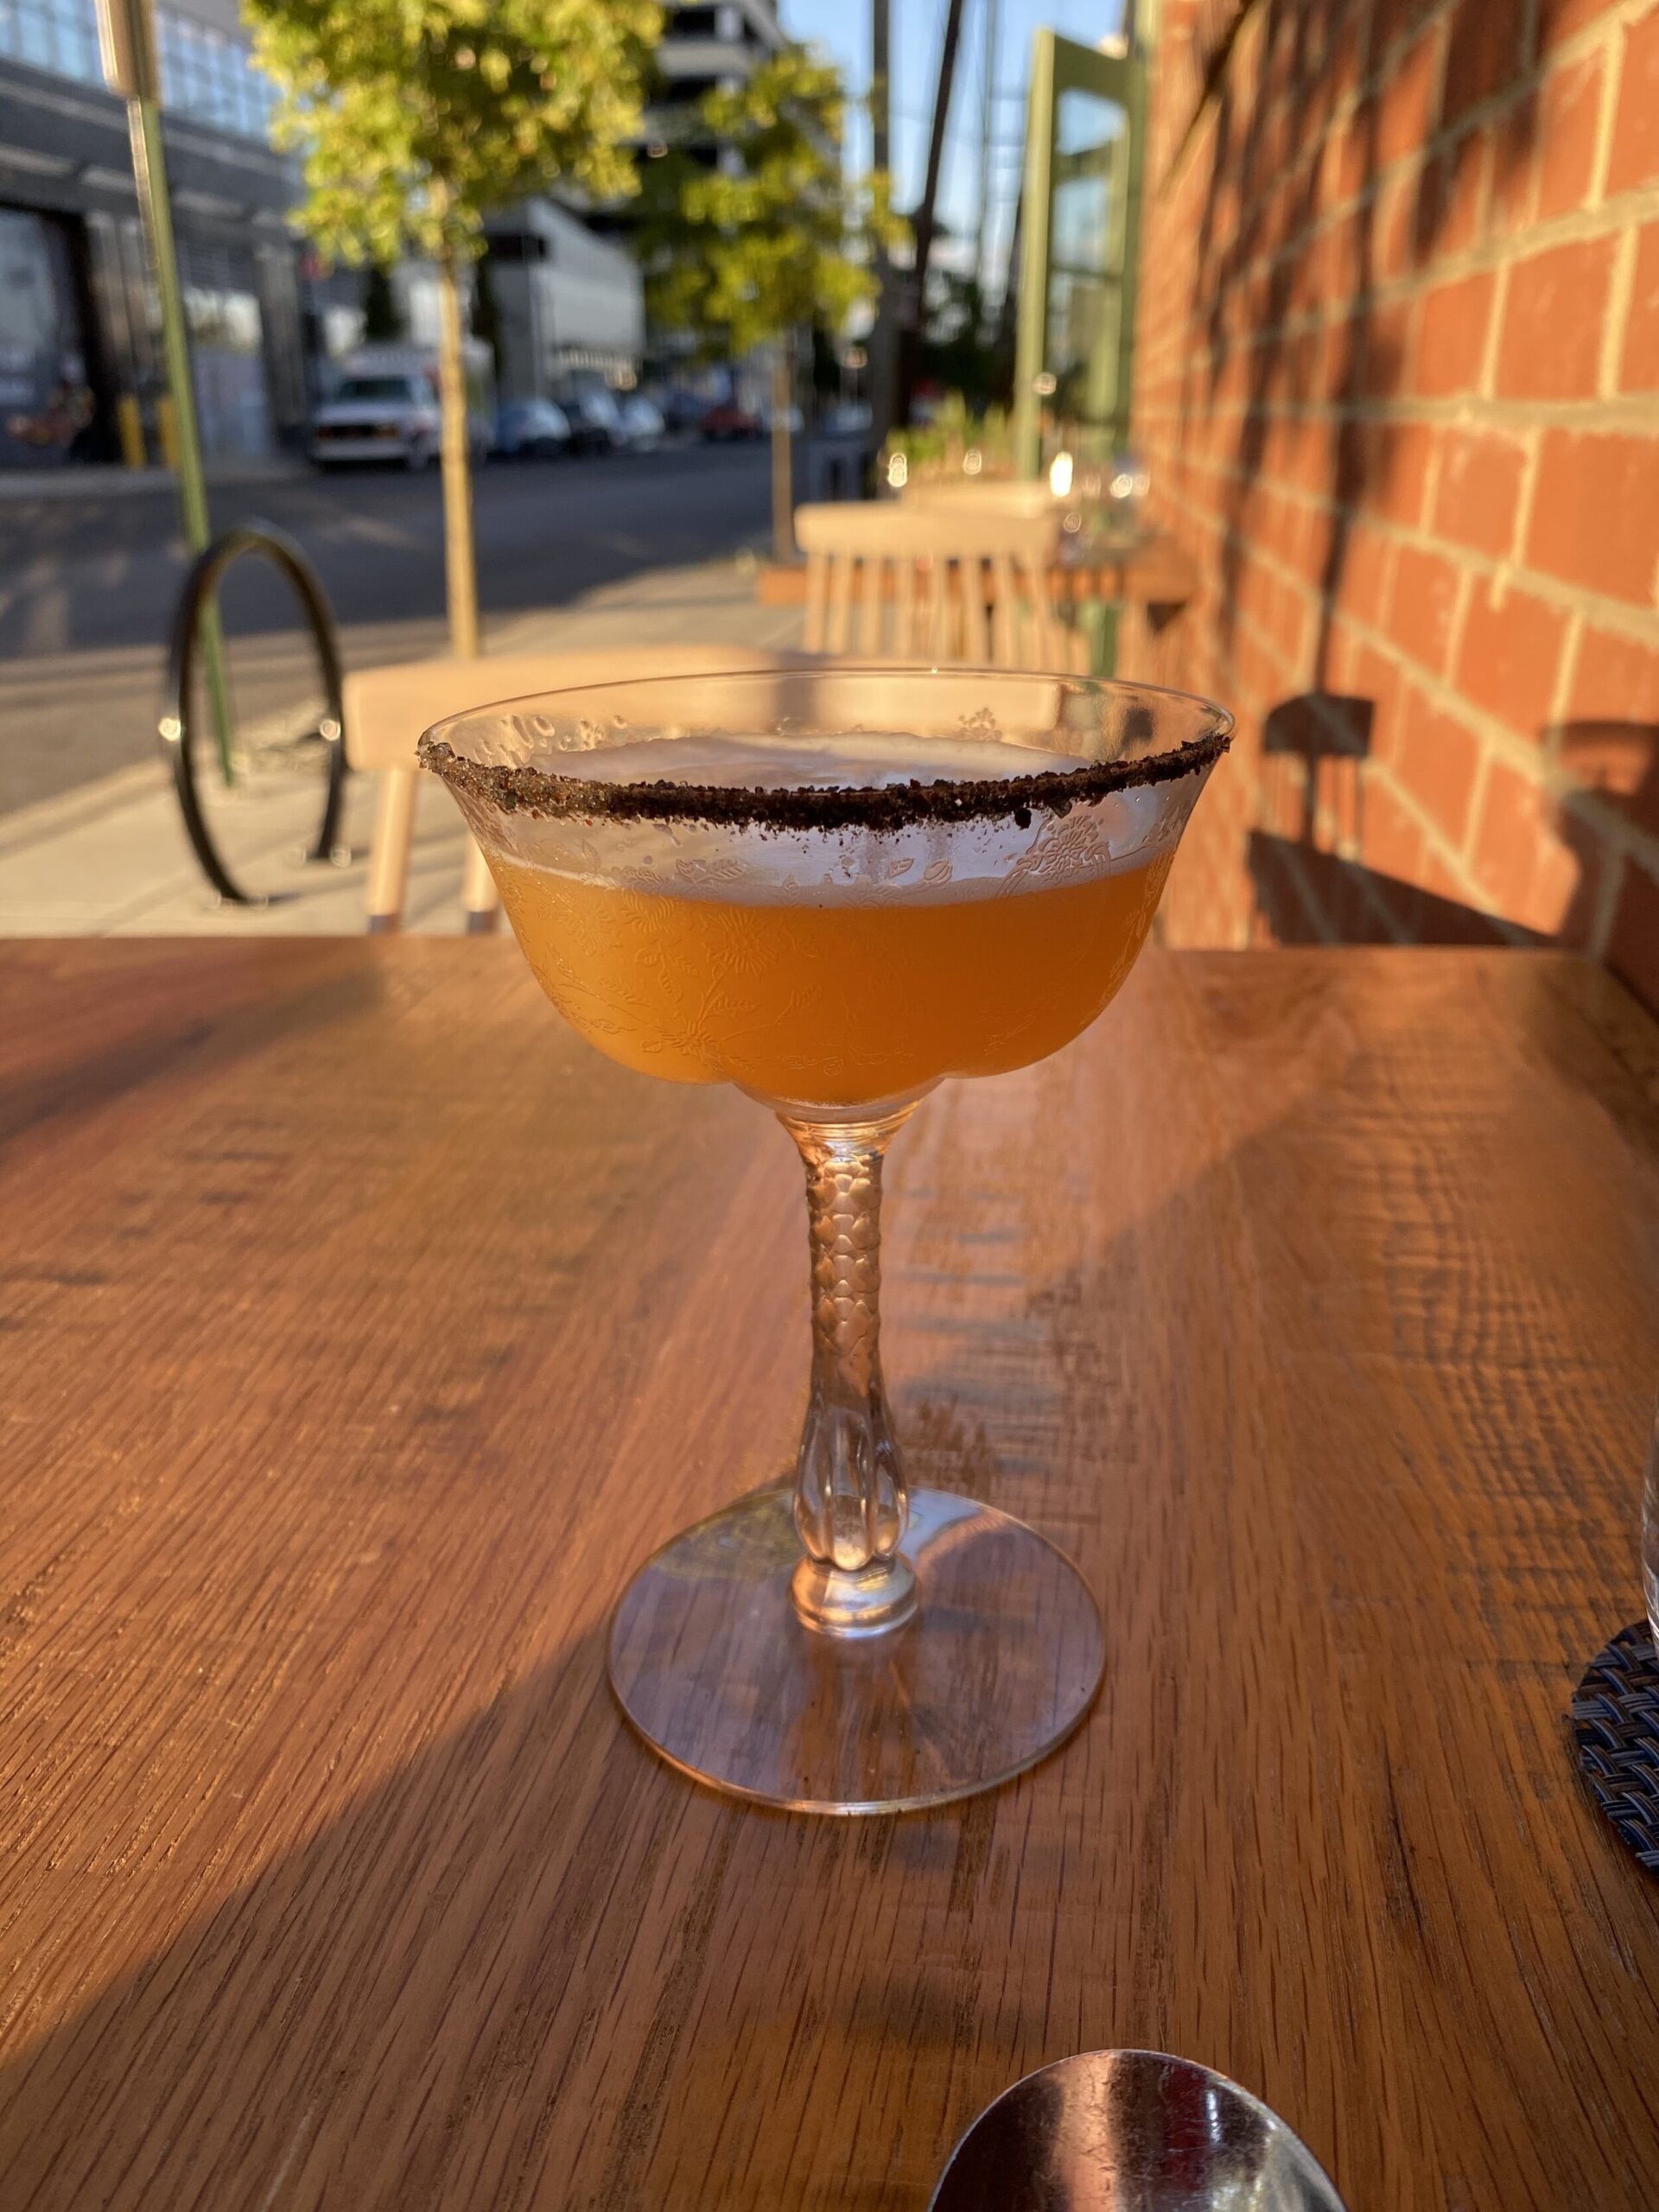 Cocktail drink on an outdoor table at a Washington DC restaurant